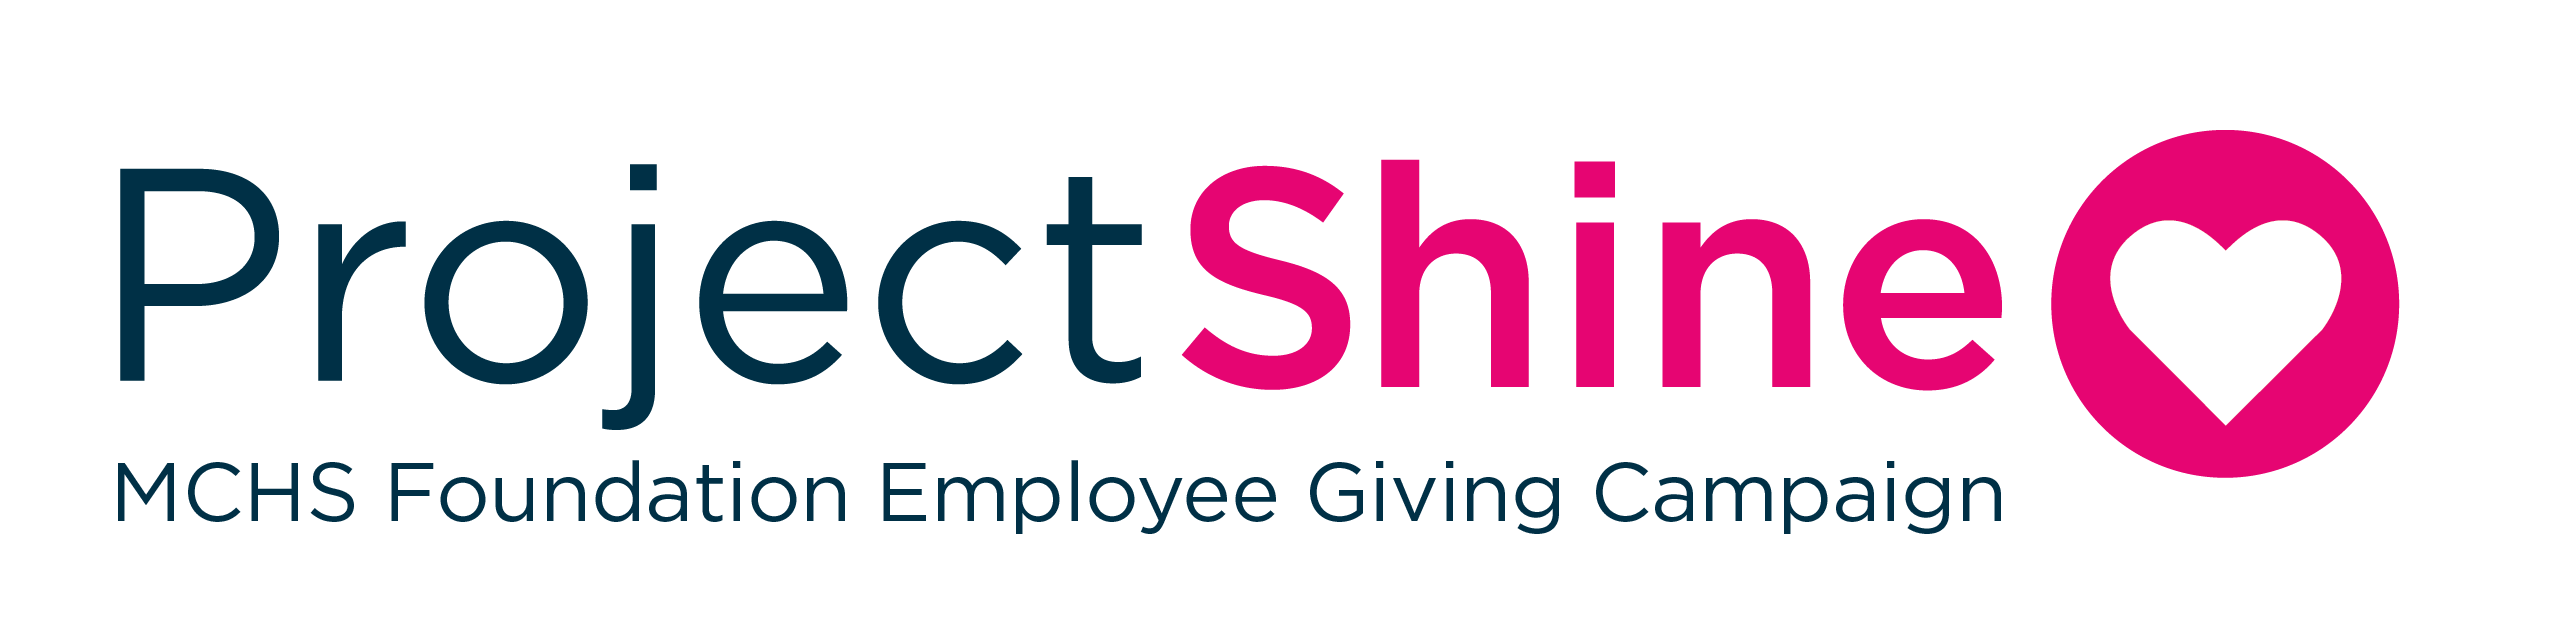 It Starts With Us - MCHS Employee Giving Campaign